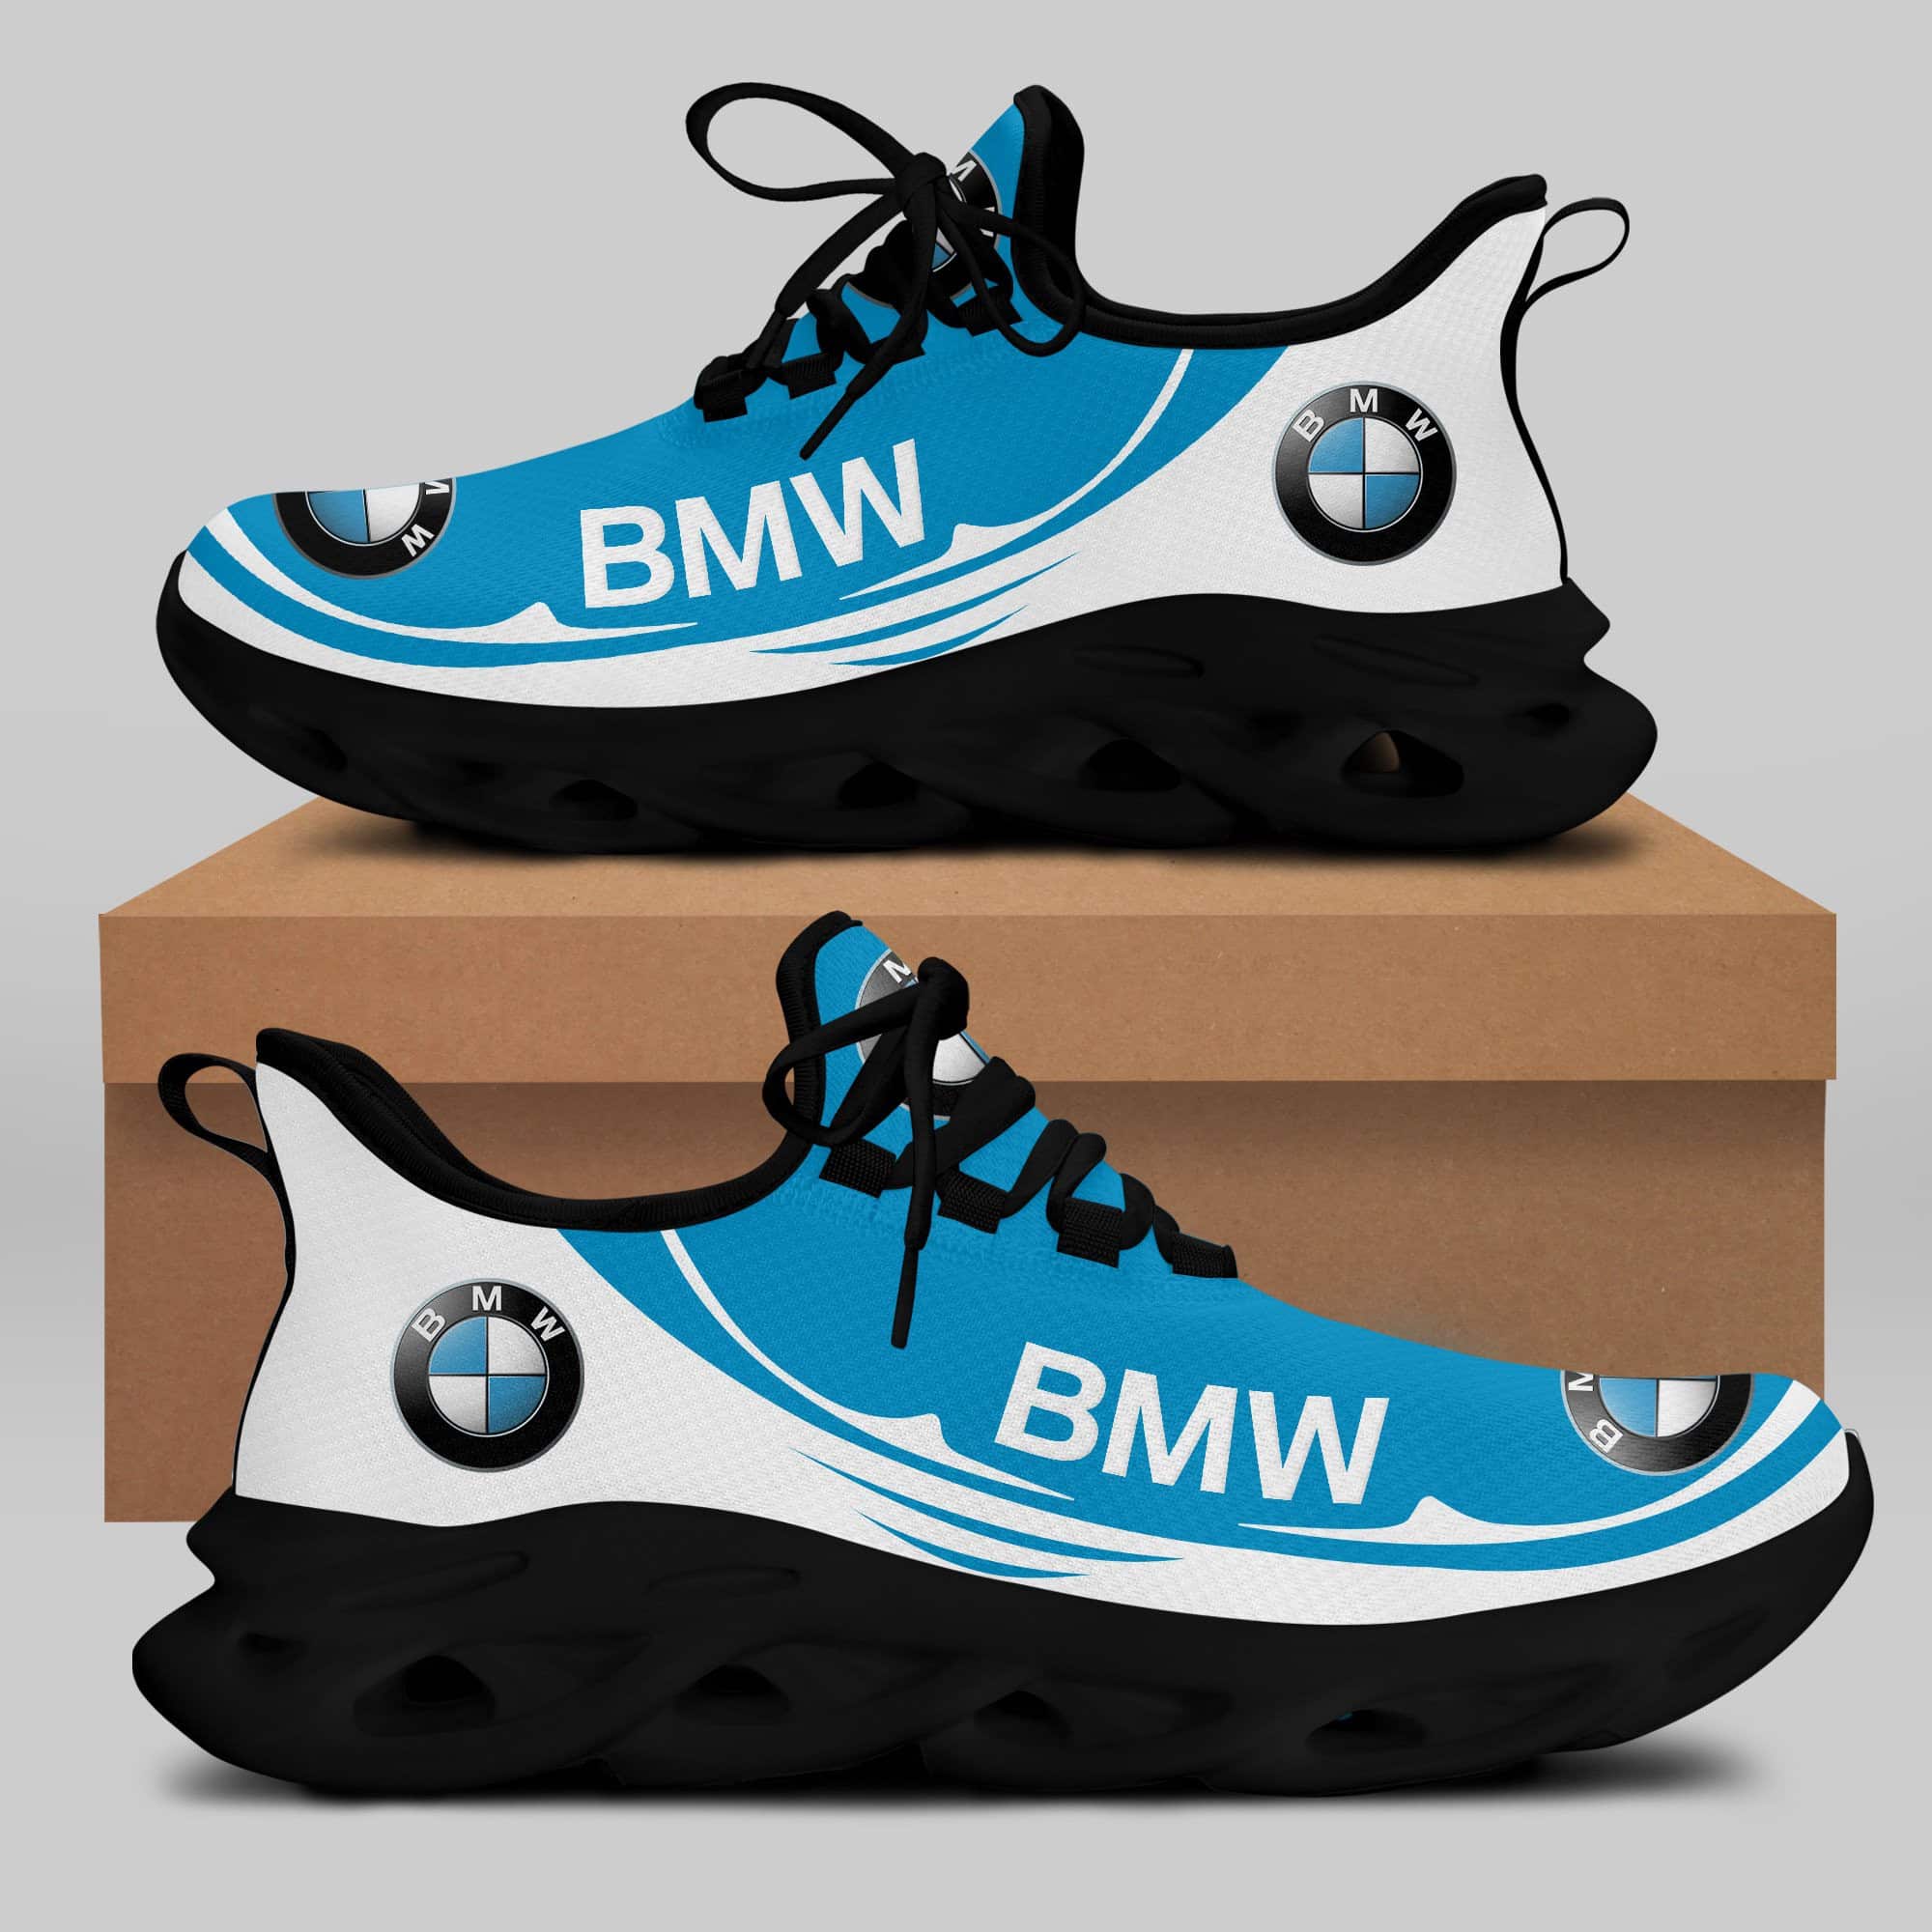 Bmw Running Shoes Max Soul Shoes Sneakers Ver 30 2